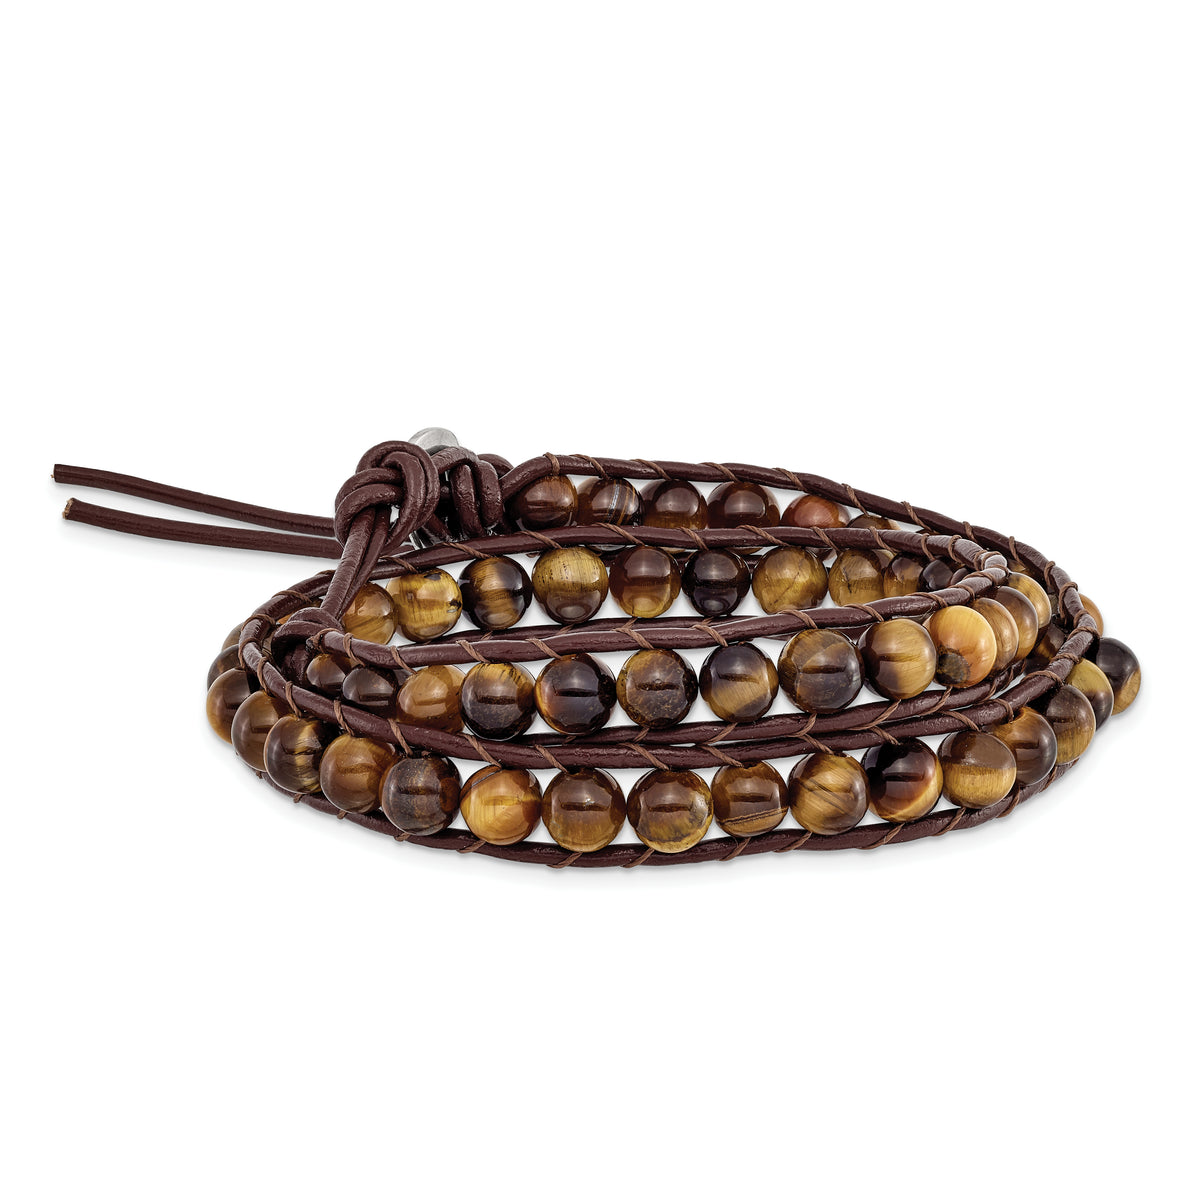 6mm Brown Beads and Leather Cord Multi Wrap Bracelet